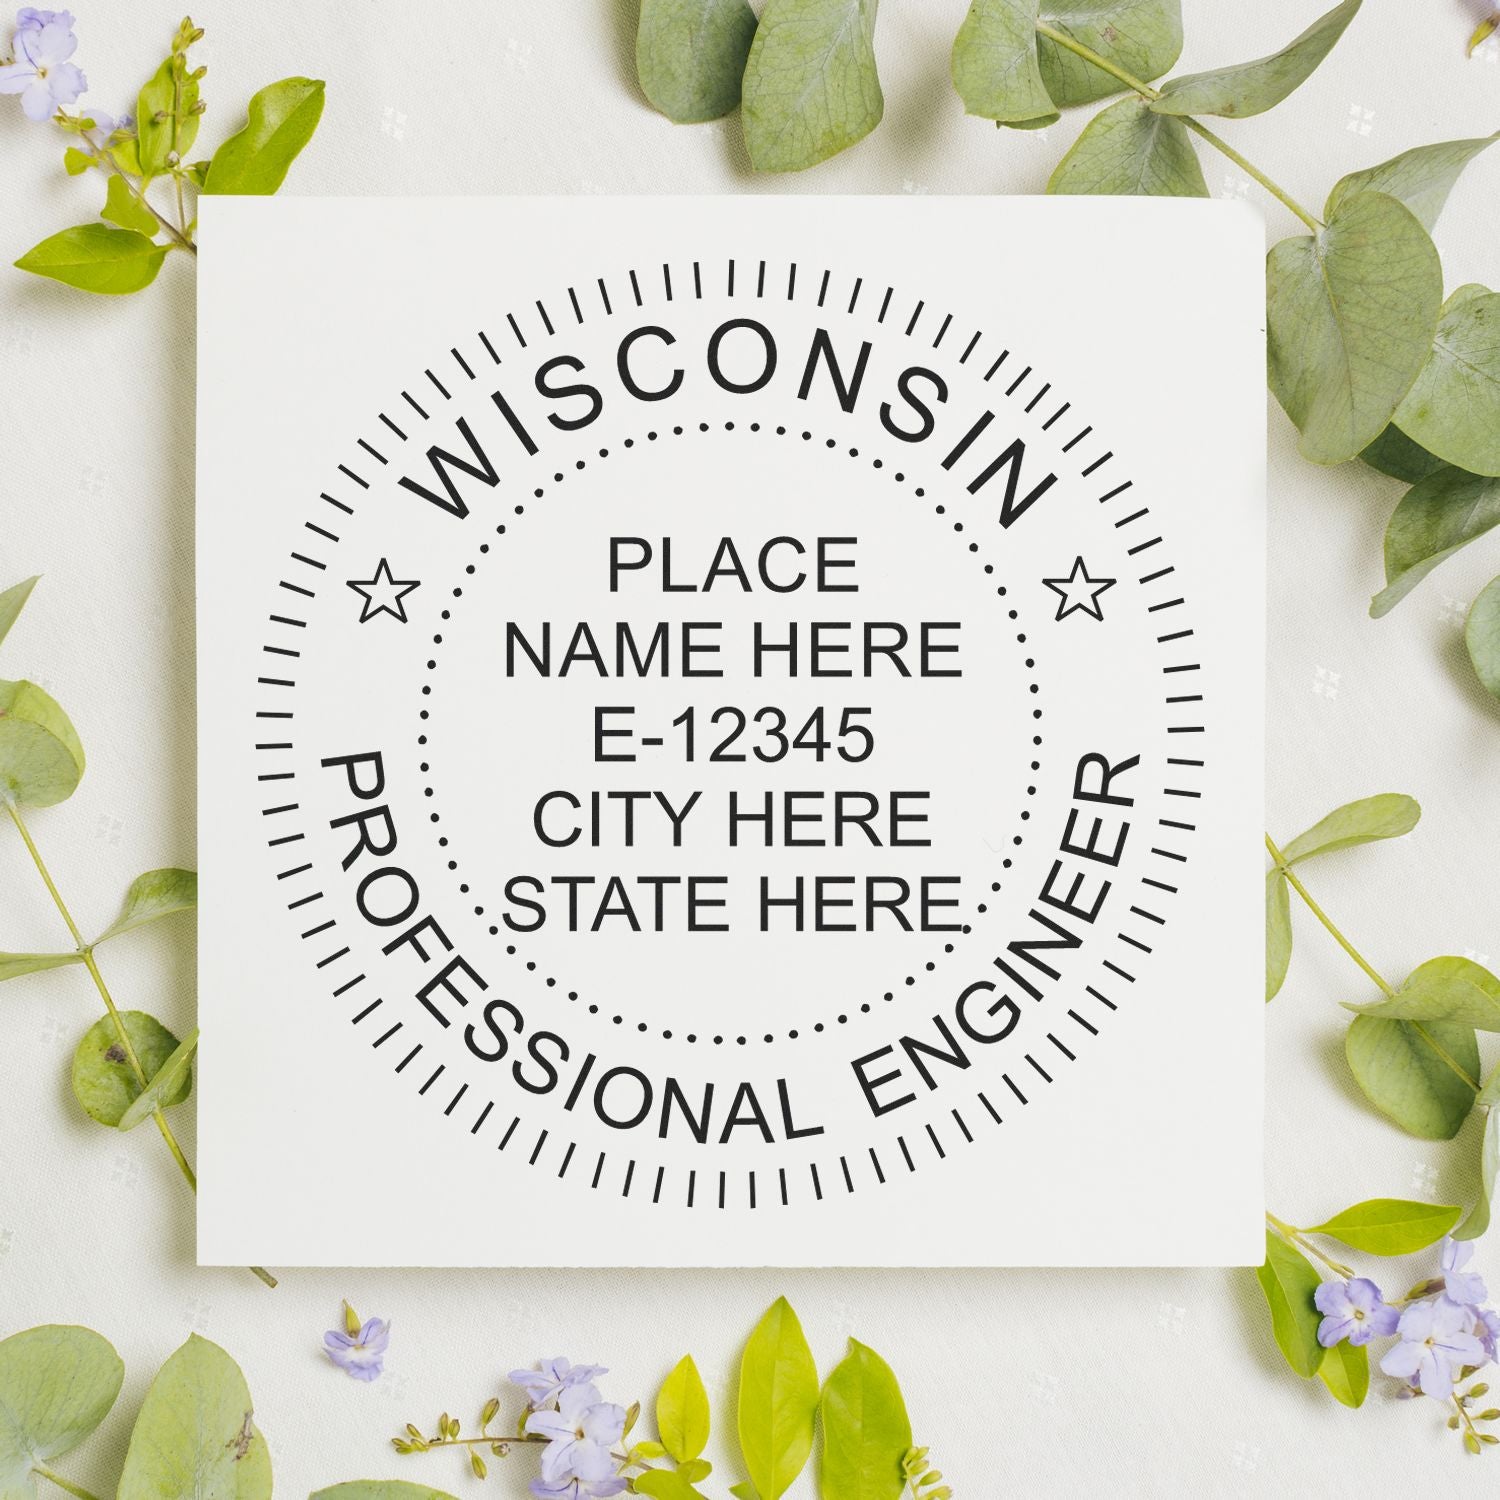 A stamped impression of the Premium MaxLight Pre-Inked Wisconsin Engineering Stamp in this stylish lifestyle photo, setting the tone for a unique and personalized product.